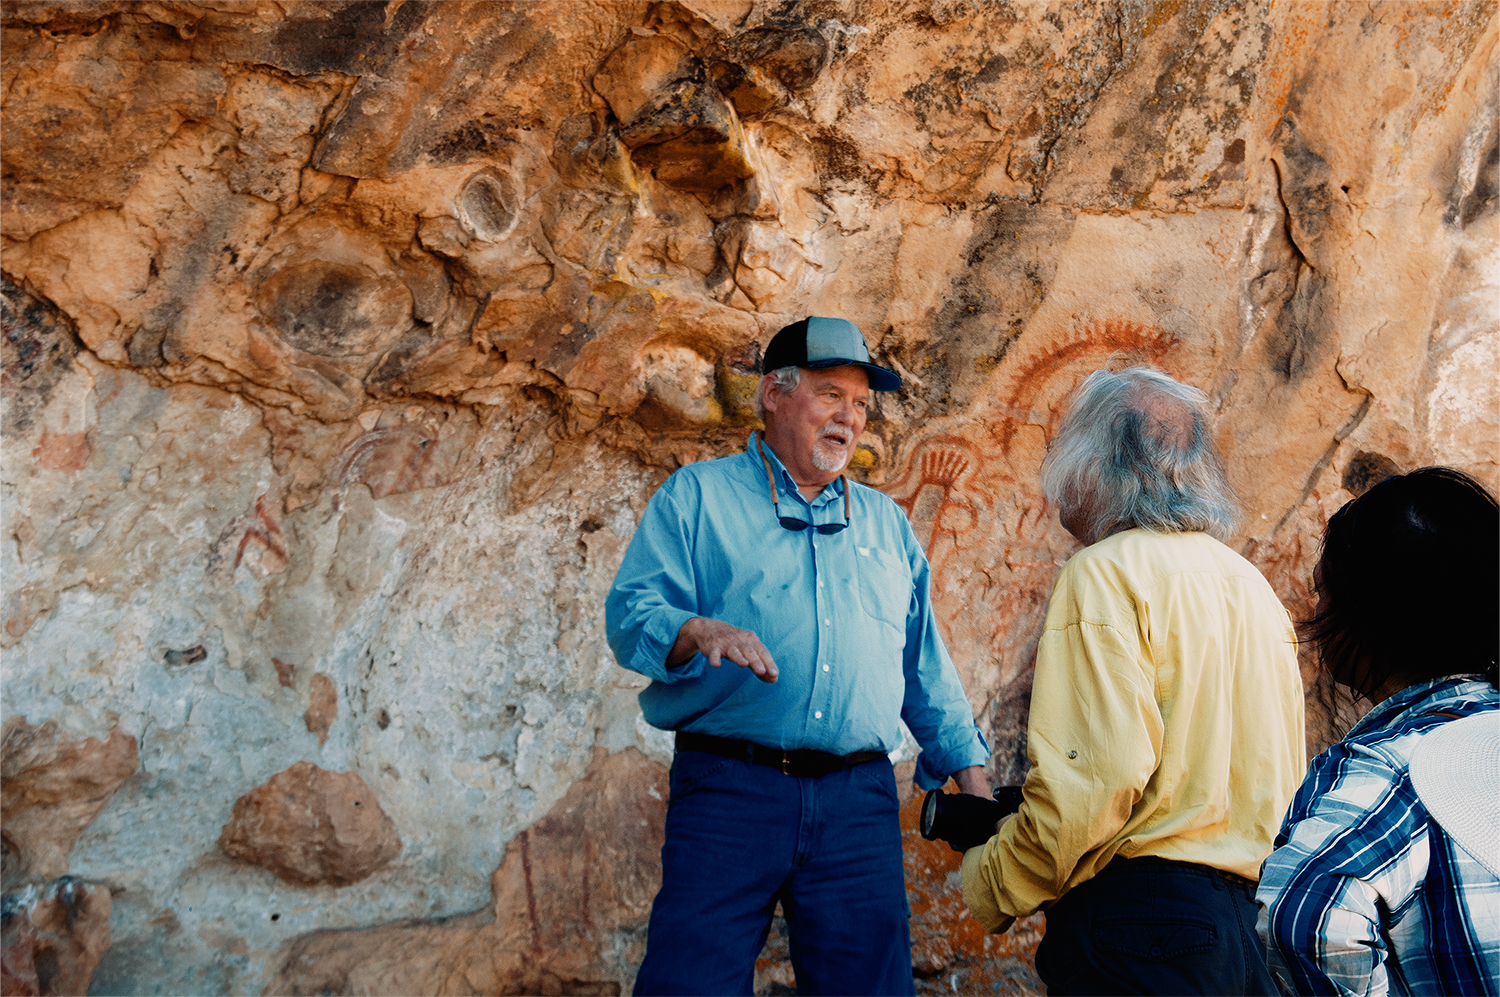 Rock Art Network Getty Conservation Institute Bradshaw Foundation David Whitley Painted Rock Petroglyphs Pictographs